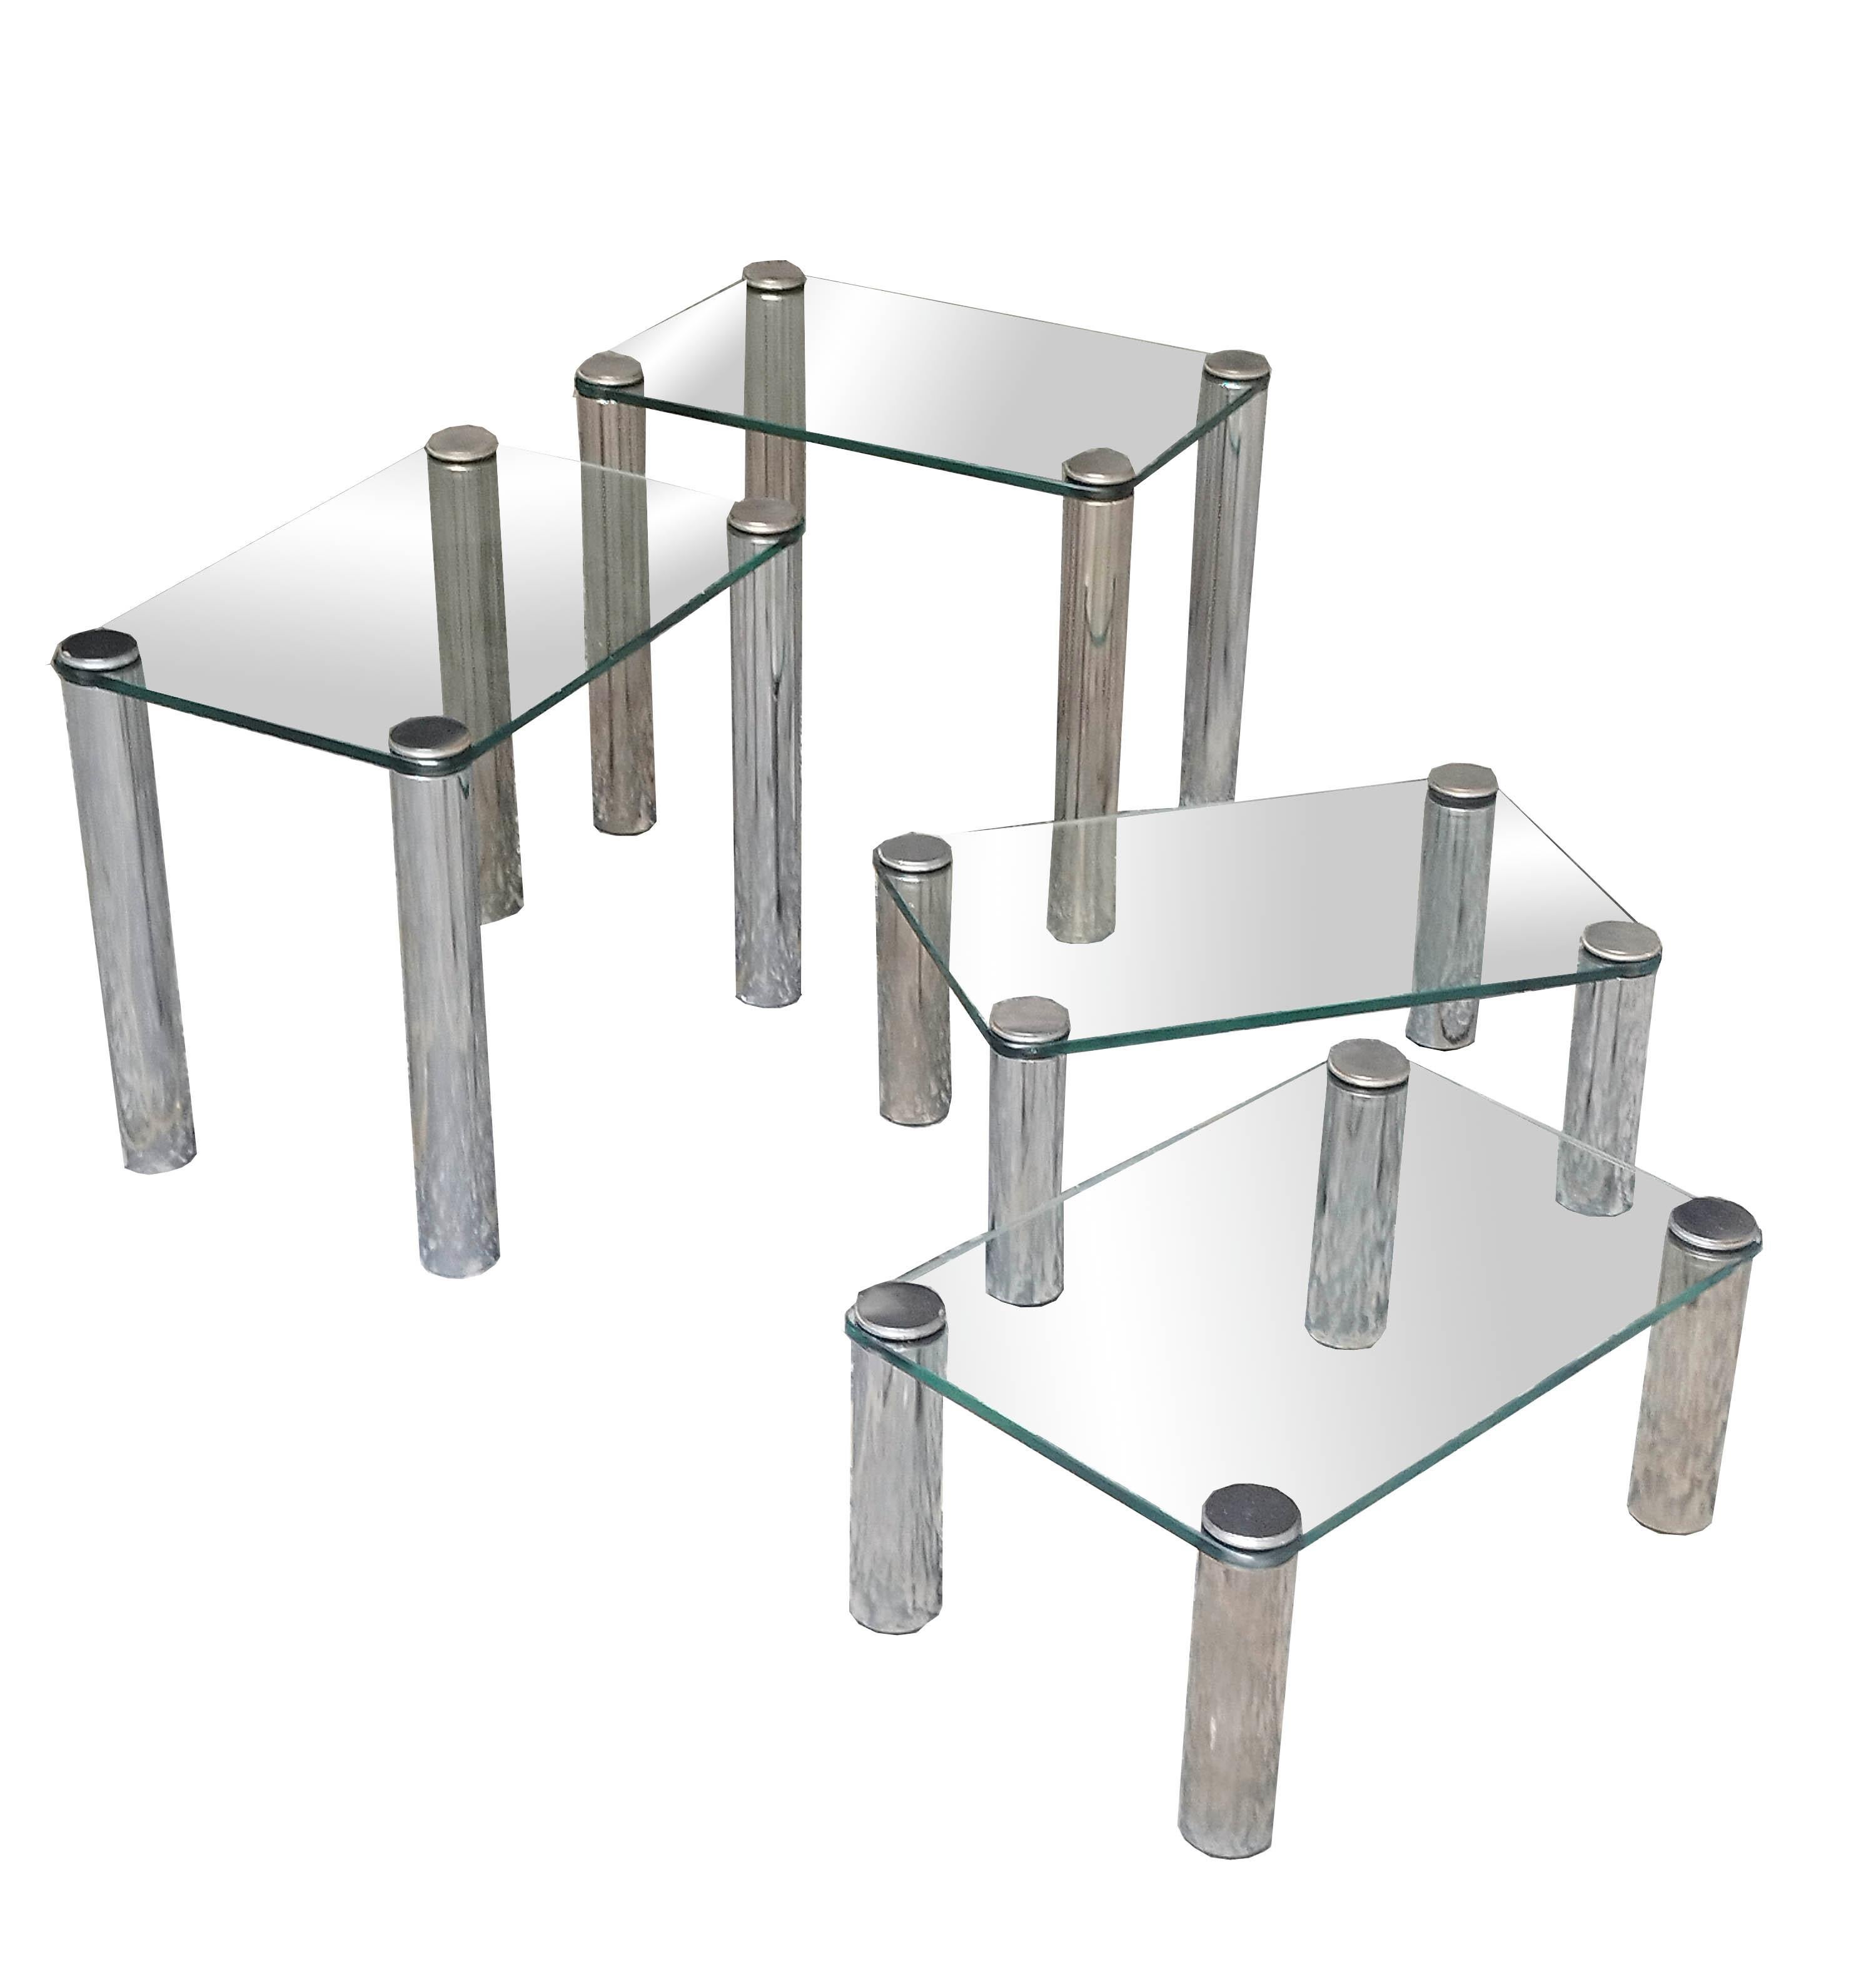 Saporiti stainless steel Etagere composed of four thick and solid glass coffee tables, which stacked one on top of the other form a small and original Etagere with an innovative fastening system between top and legs, suitable for any environment.